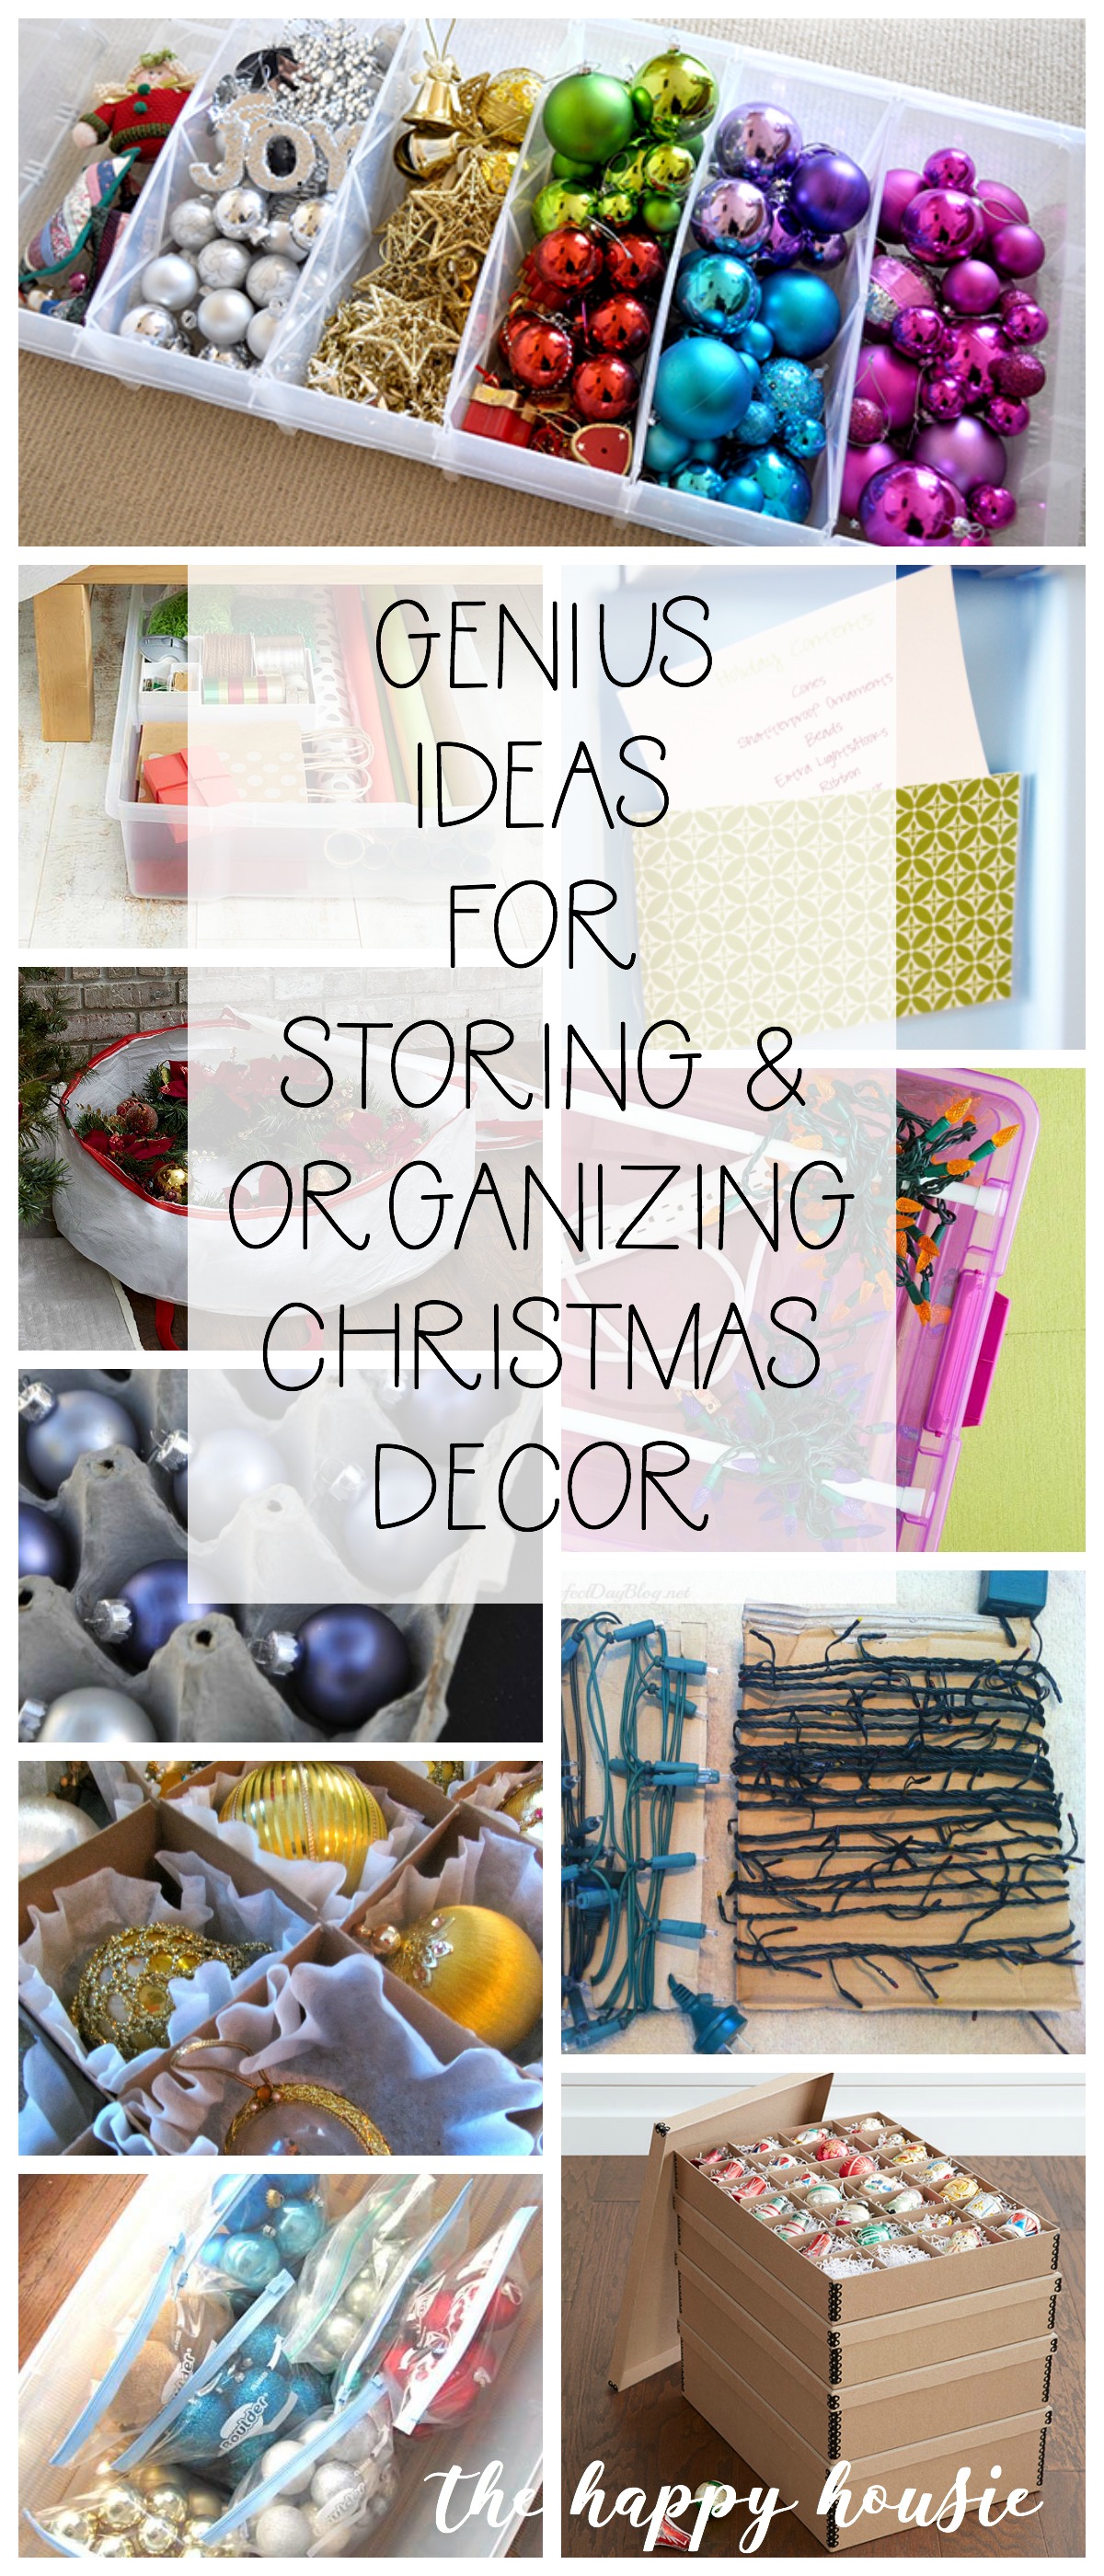 How to Store Seasonal Decorations — My Holiday Organizing Tips